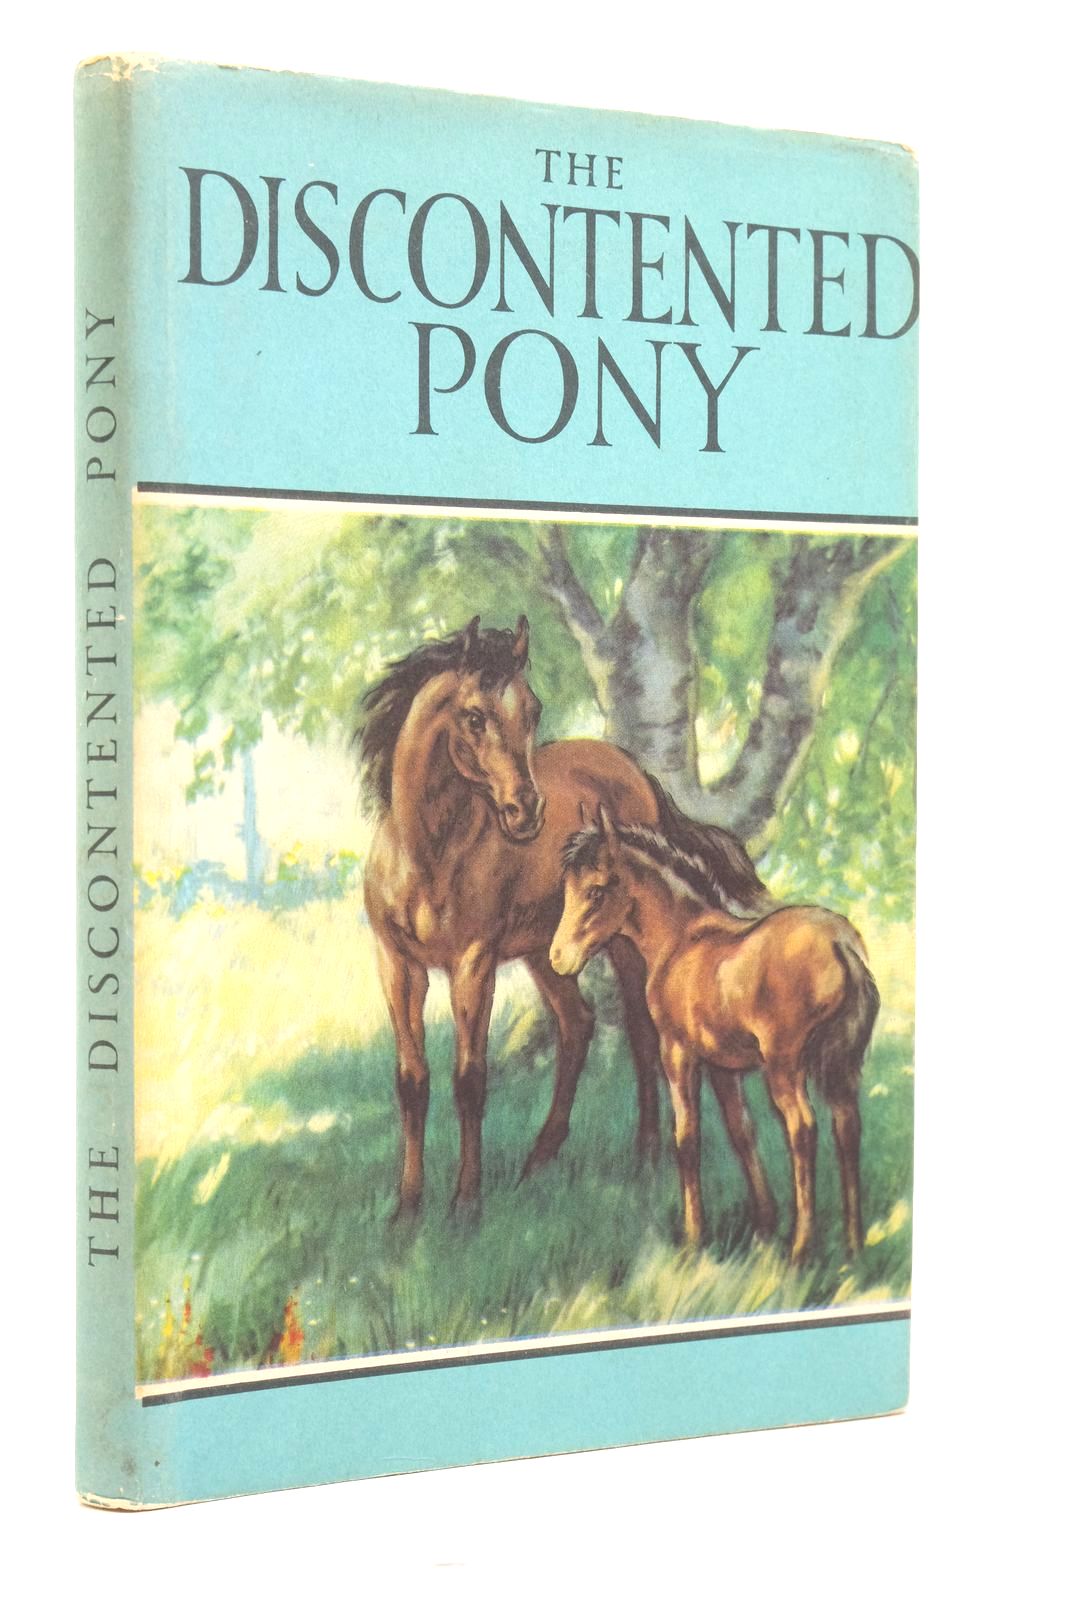 Photo of THE DISCONTENTED PONY written by Barr, Noel illustrated by Hickling, P.B. published by Wills & Hepworth Ltd. (STOCK CODE: 2137447)  for sale by Stella & Rose's Books